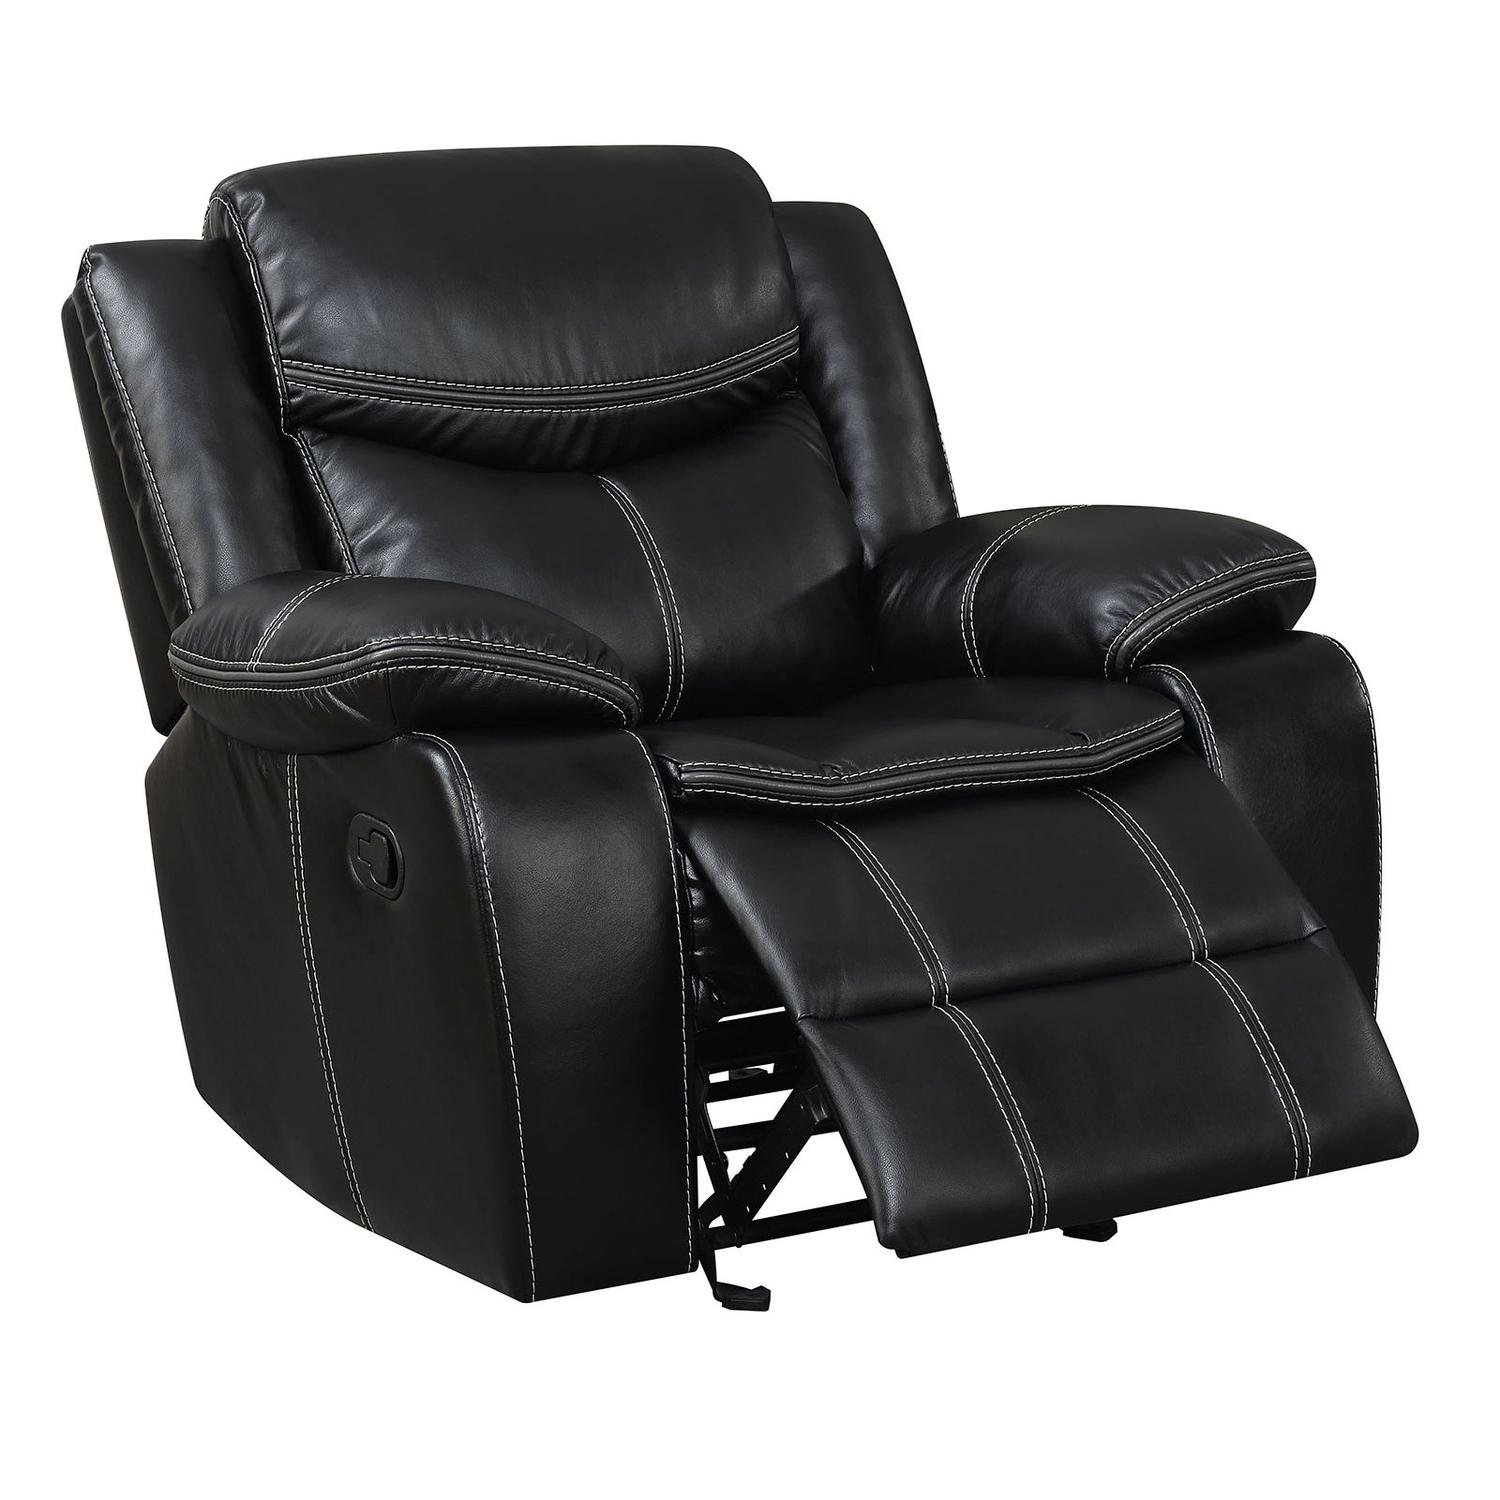 Transitional Recliner CM6981-CH Pollux CM6981-CH in Brown 